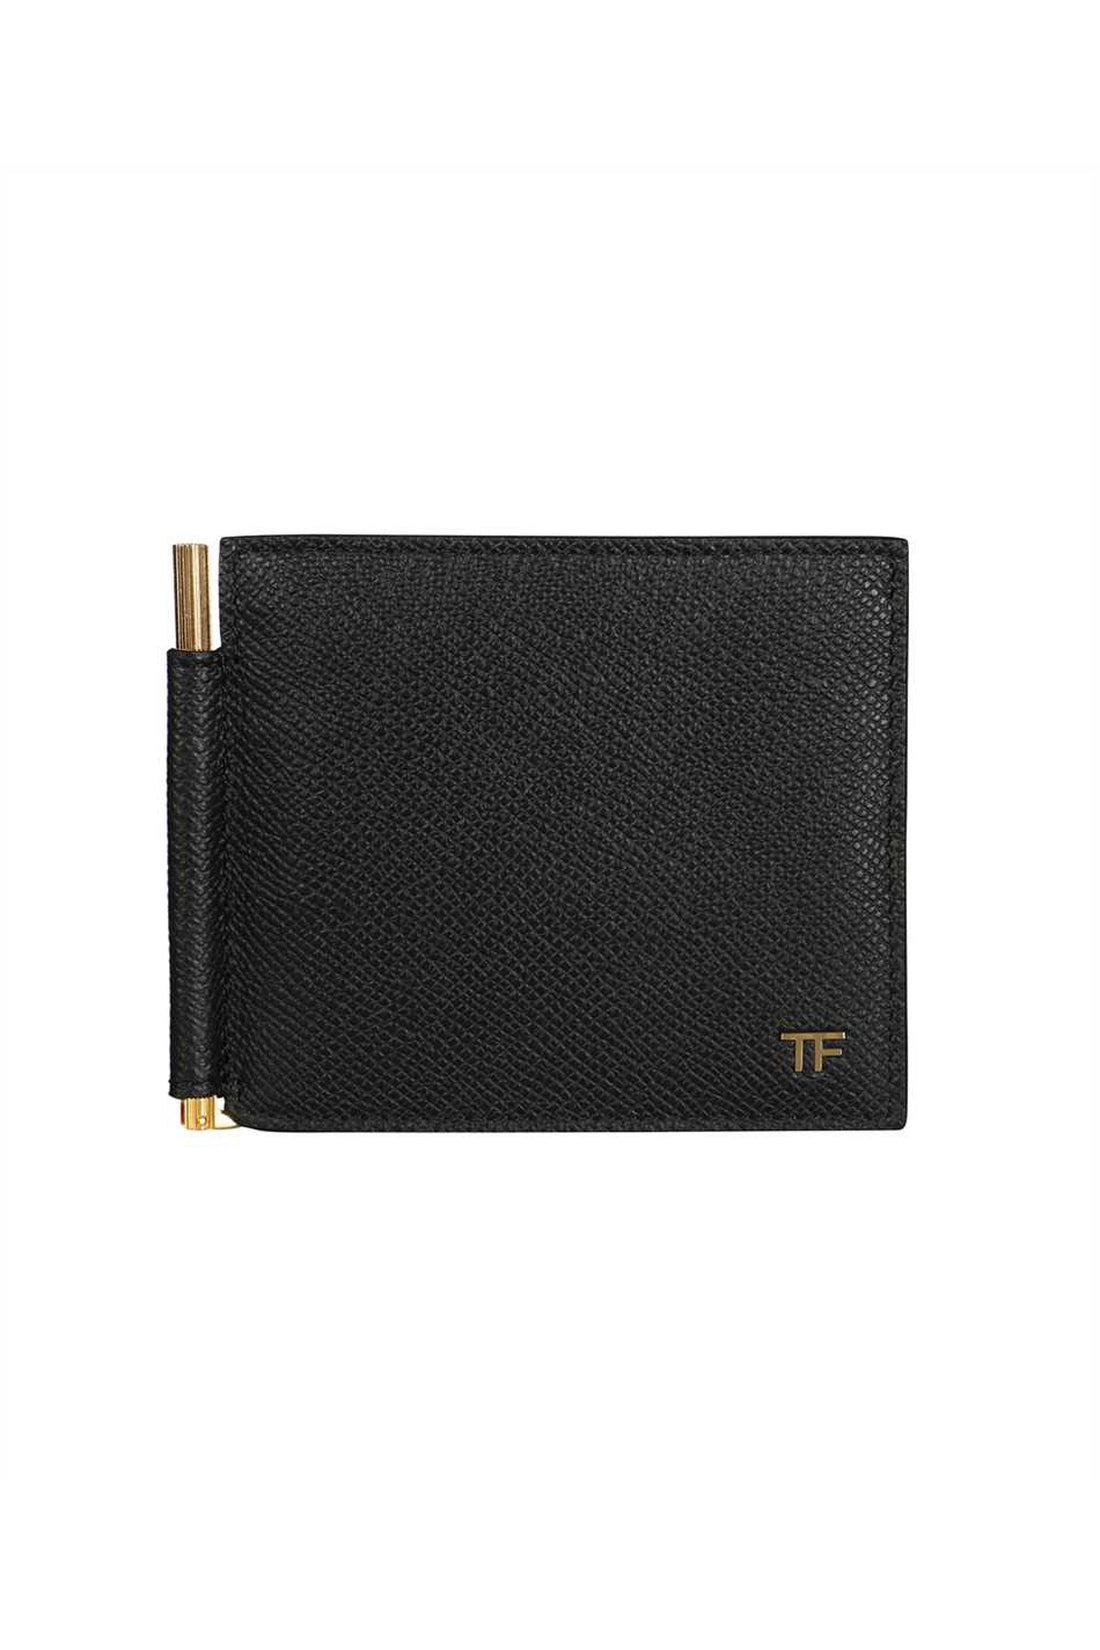 Tom Ford-OUTLET-SALE-Leather flap-over wallet-ARCHIVIST